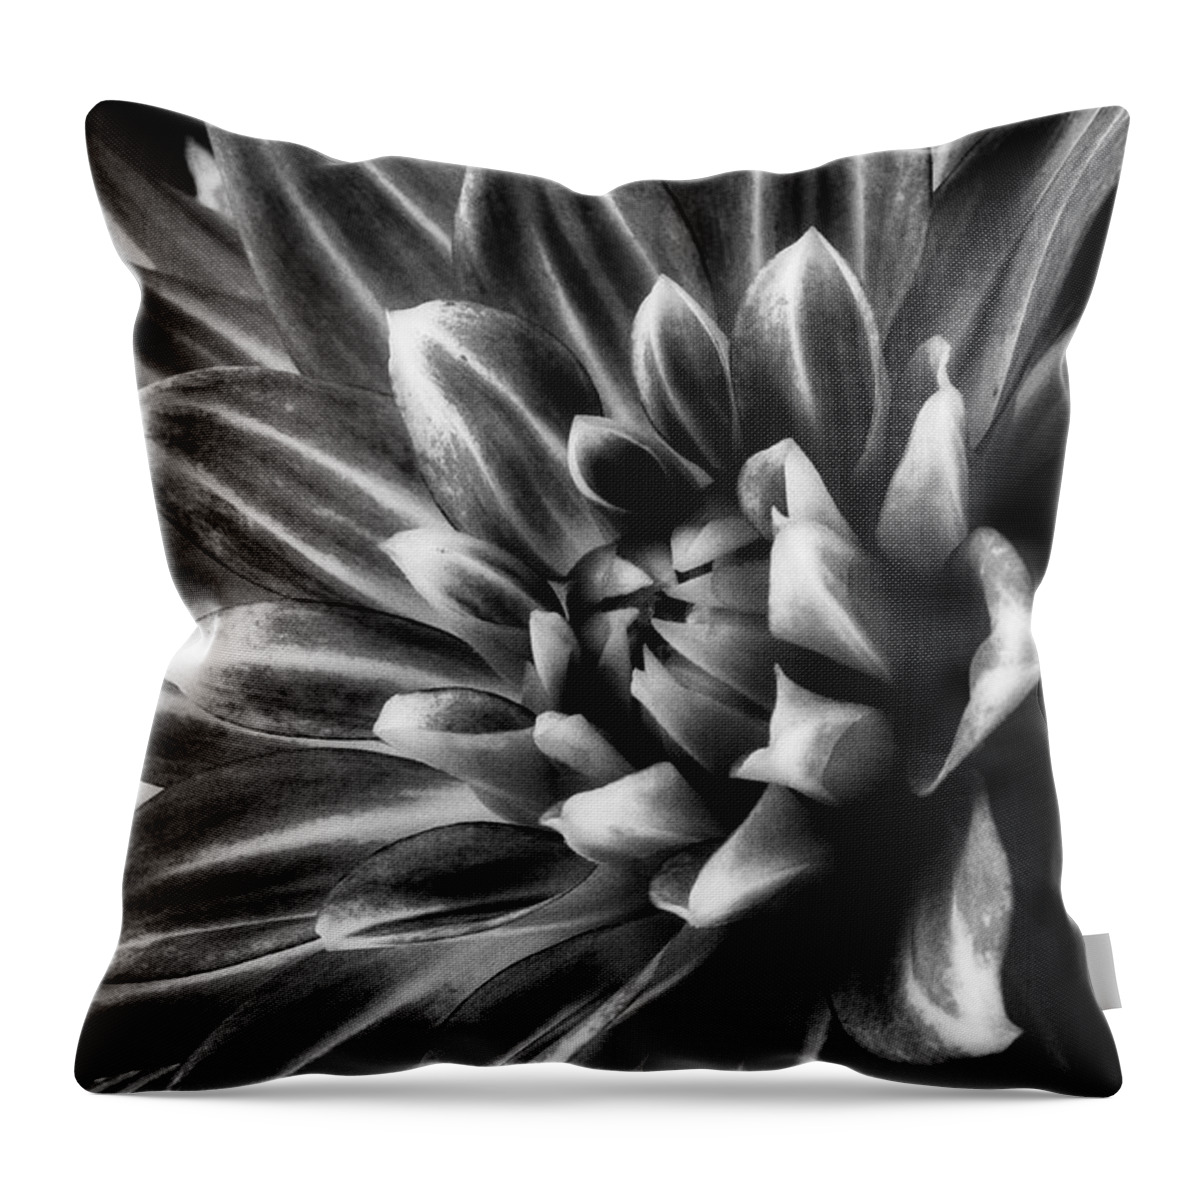 Dahlia Throw Pillow featuring the photograph Spider Dahlia In Black And White by Garry Gay